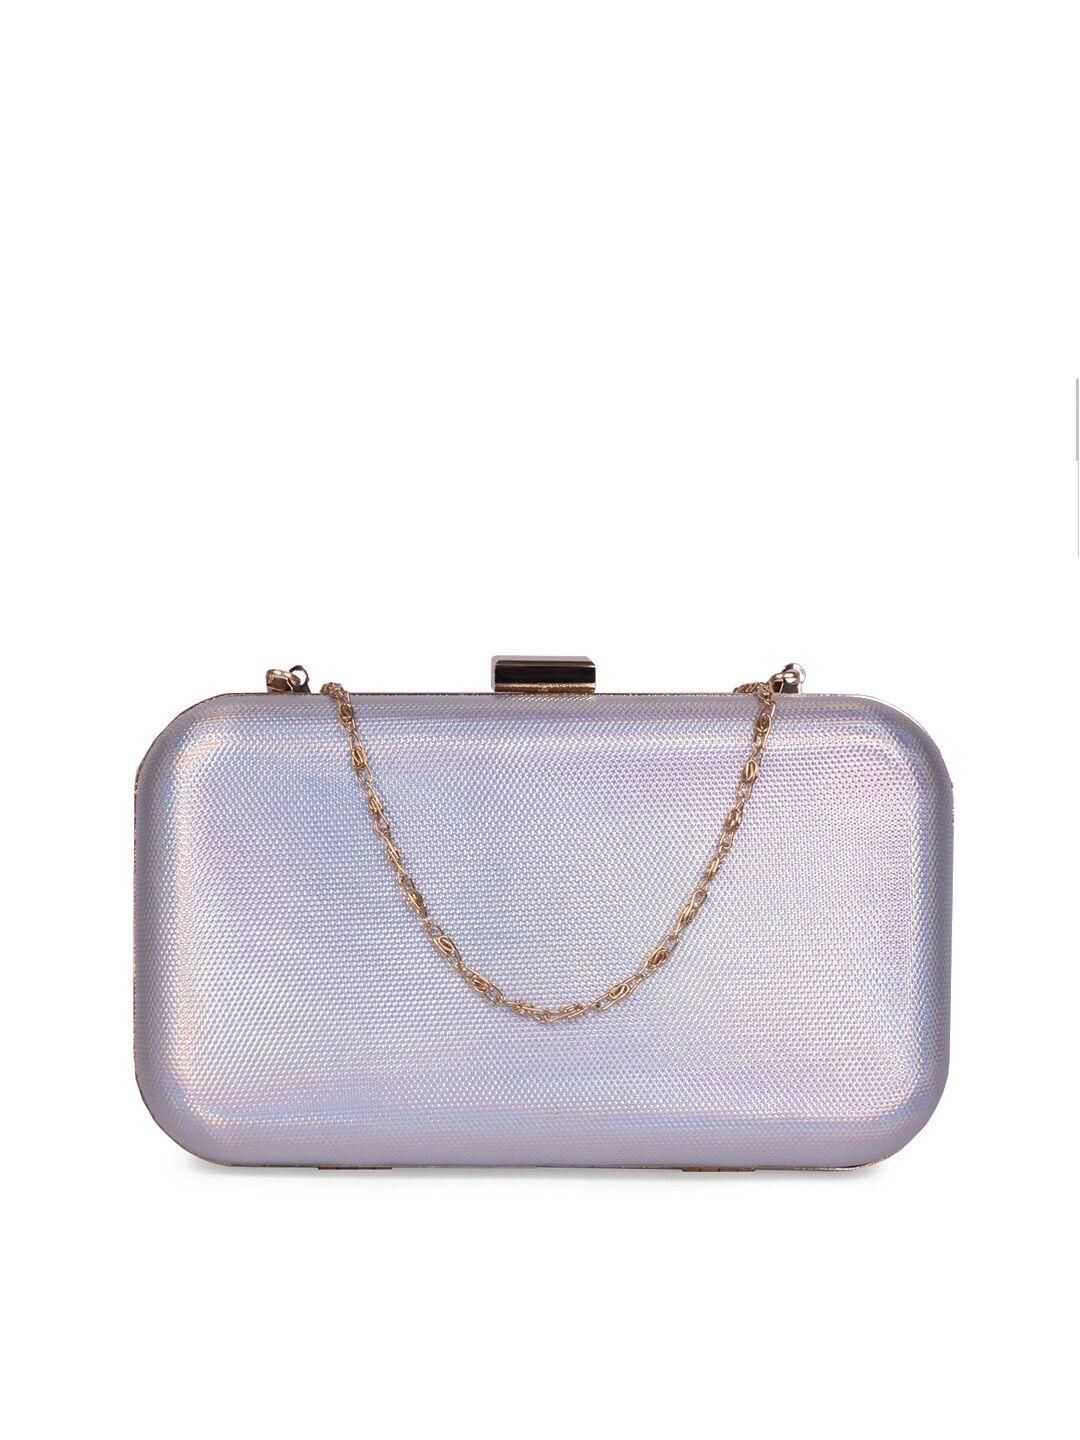 modern myth silver-toned holographic box clutch